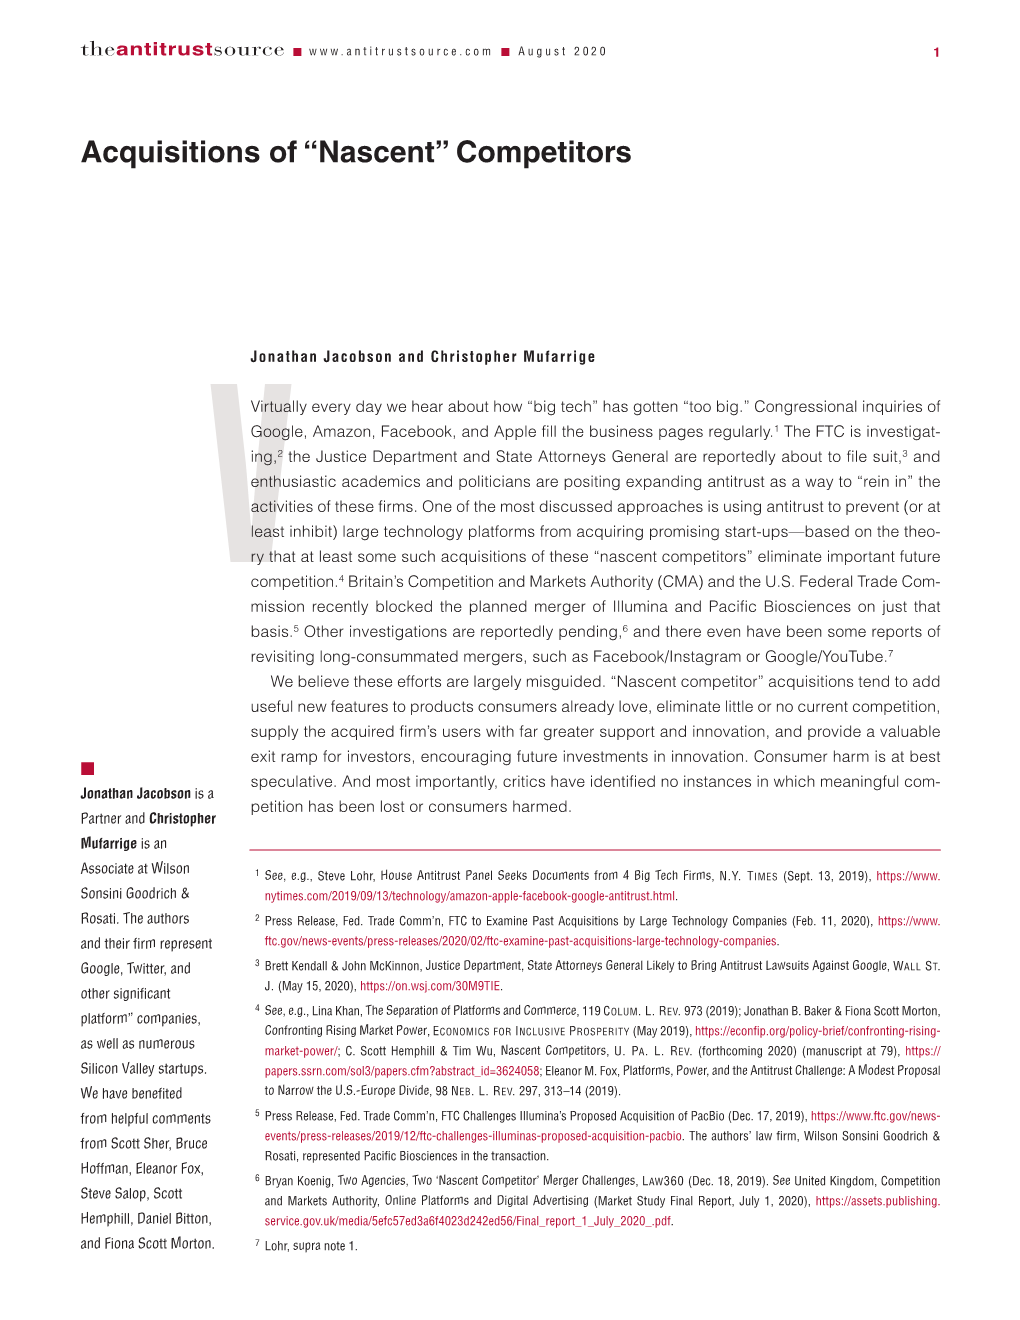 Acquisitions of “Nascent” Competitors